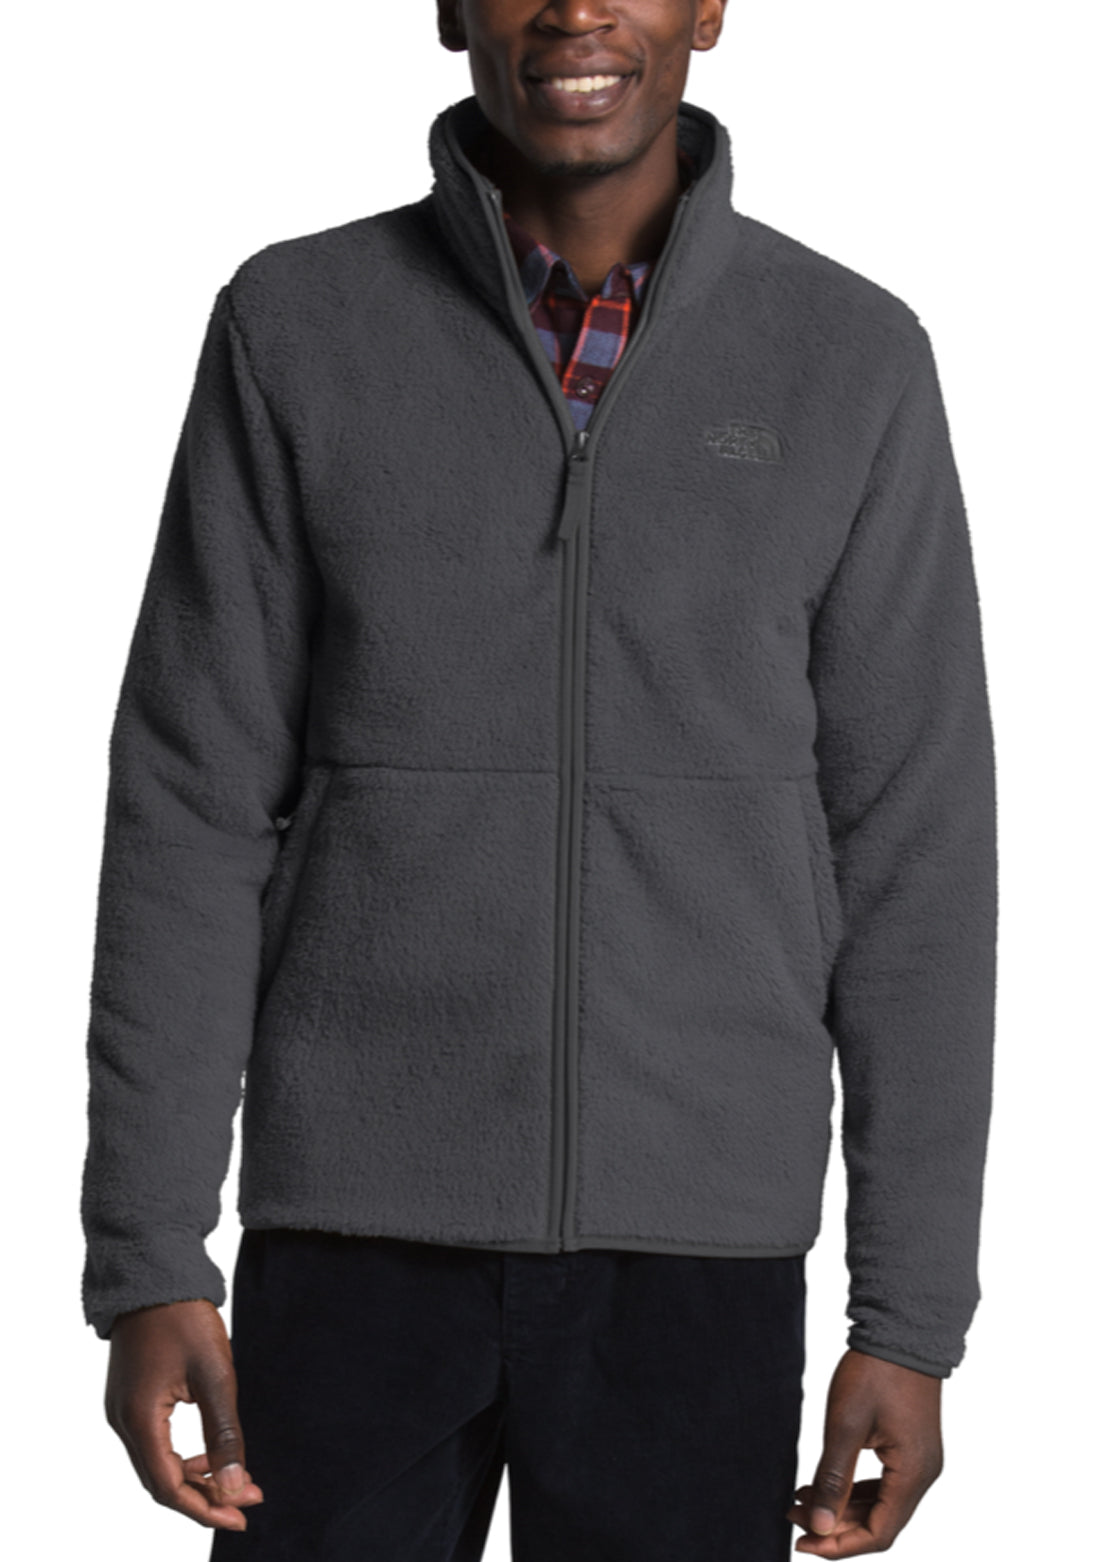 The North Face Men's Dunraven Sherpa Full Zip Fleece - PRFO Sports